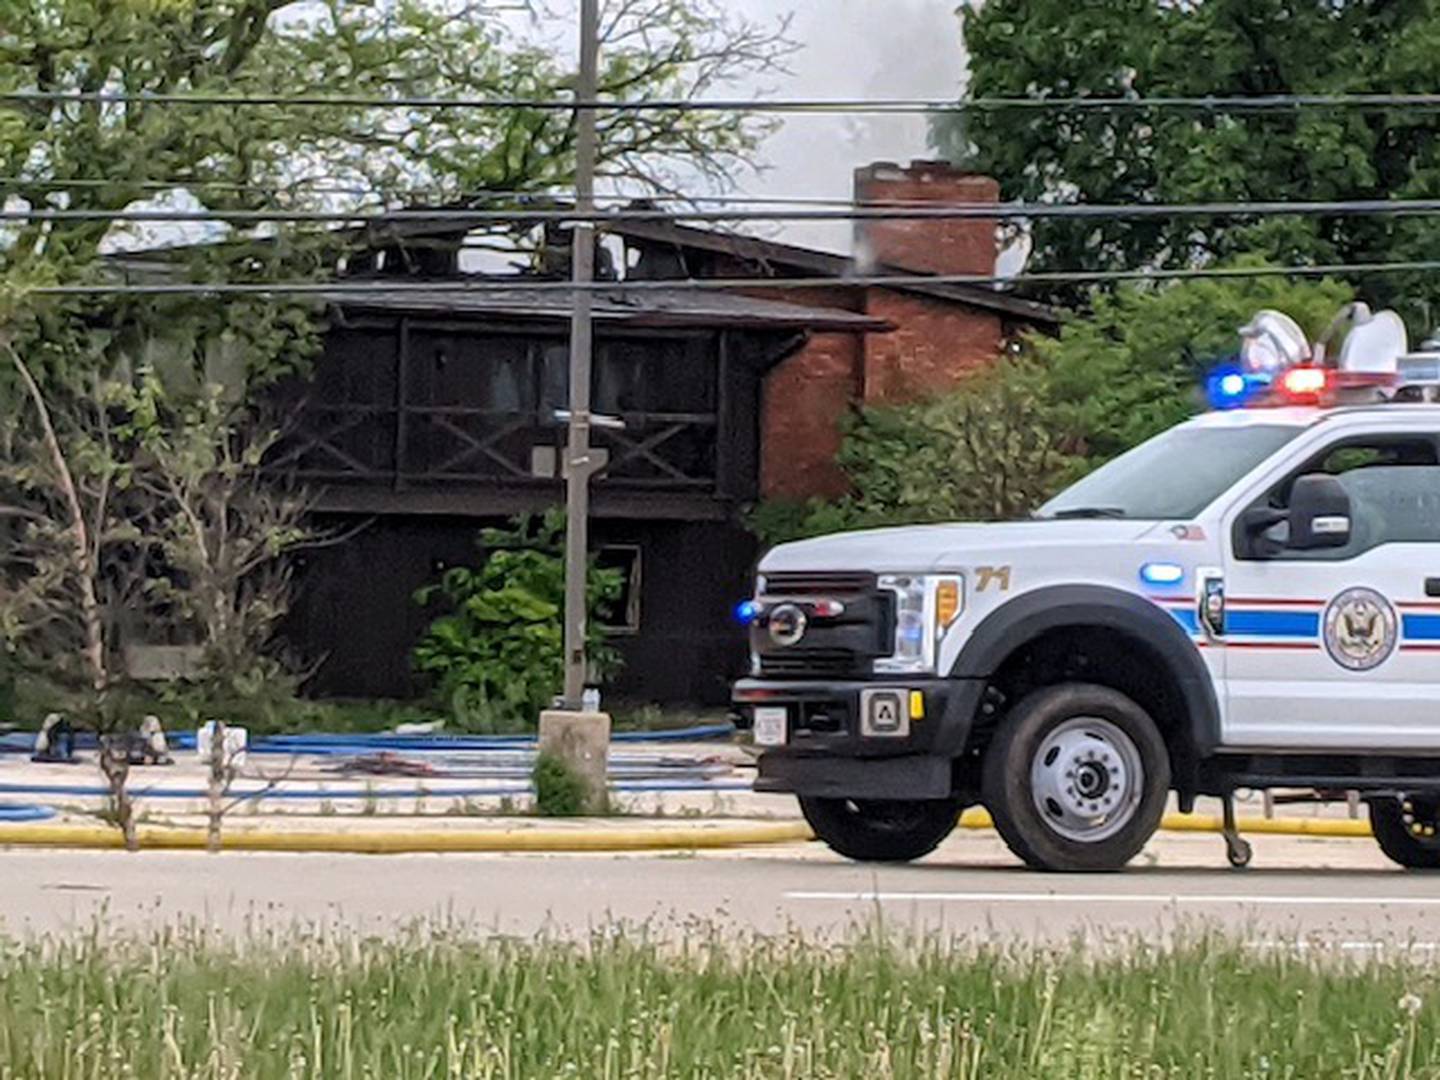 First responders are on the scene of a structure fire at the former Pheasant Run on Saturday in St. Charles.